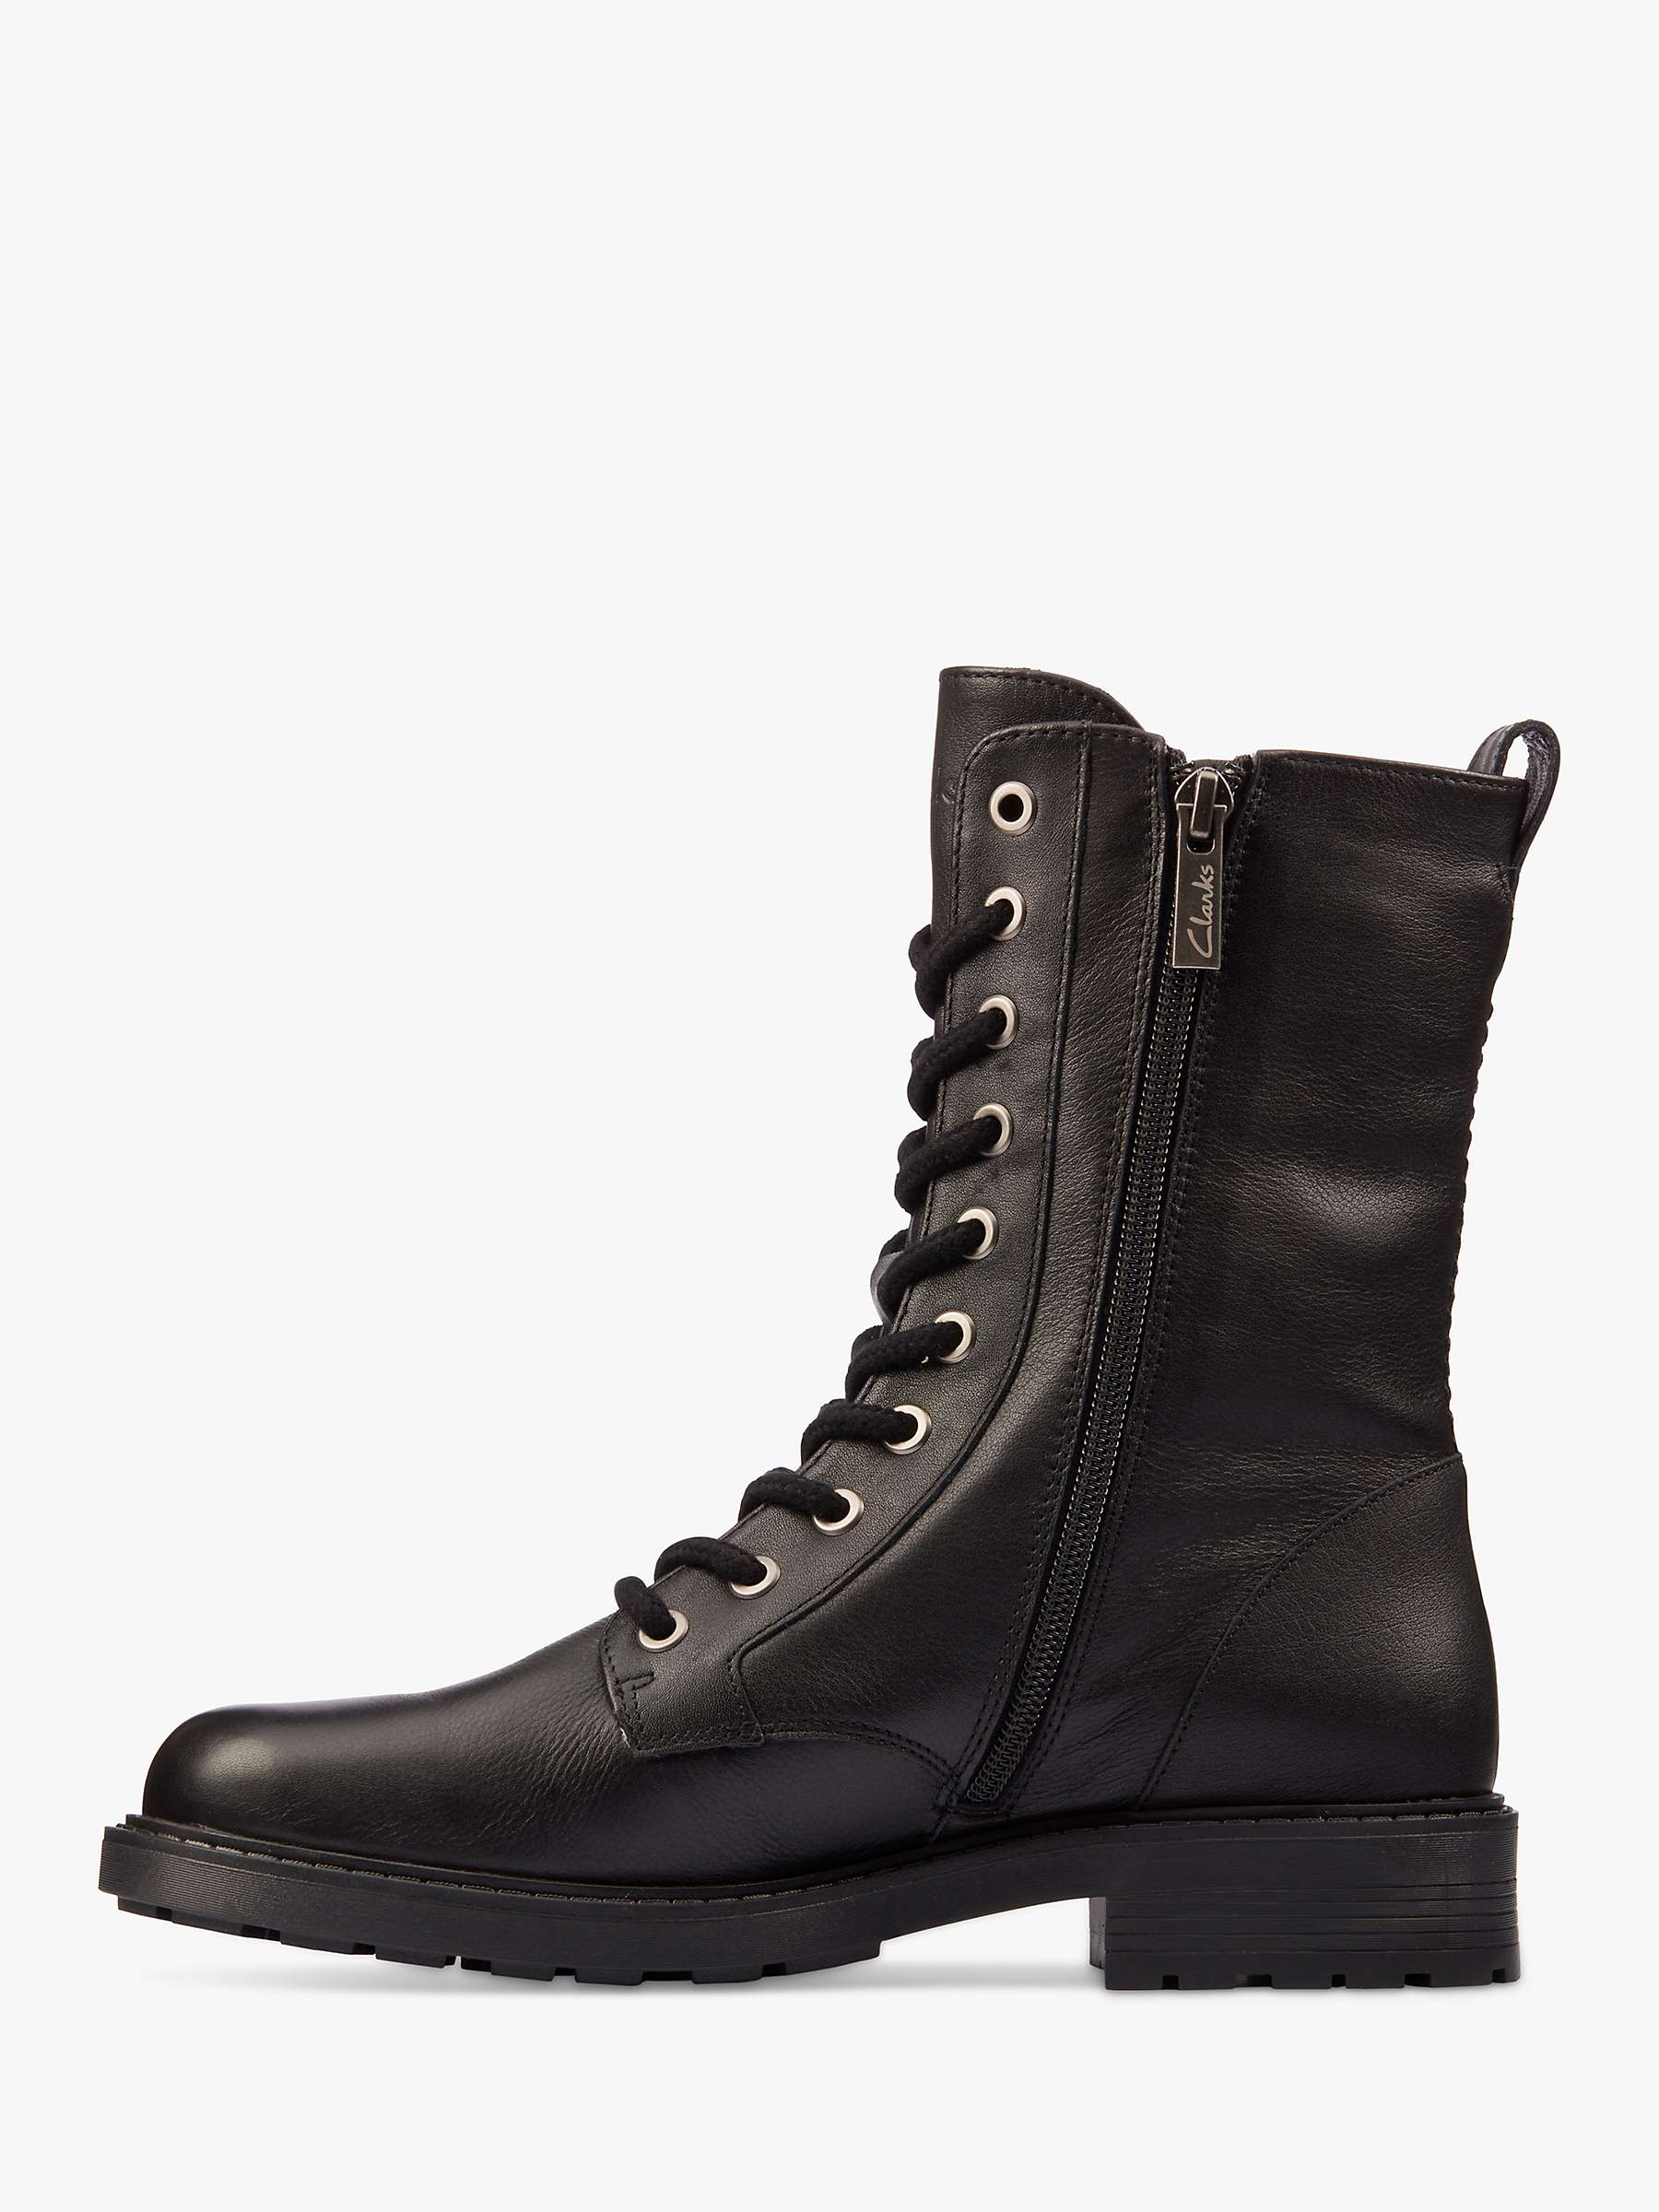 Buy Clarks Orinoco 2 Style Leather Wide Fit Mid Height Boots, Black Online at johnlewis.com